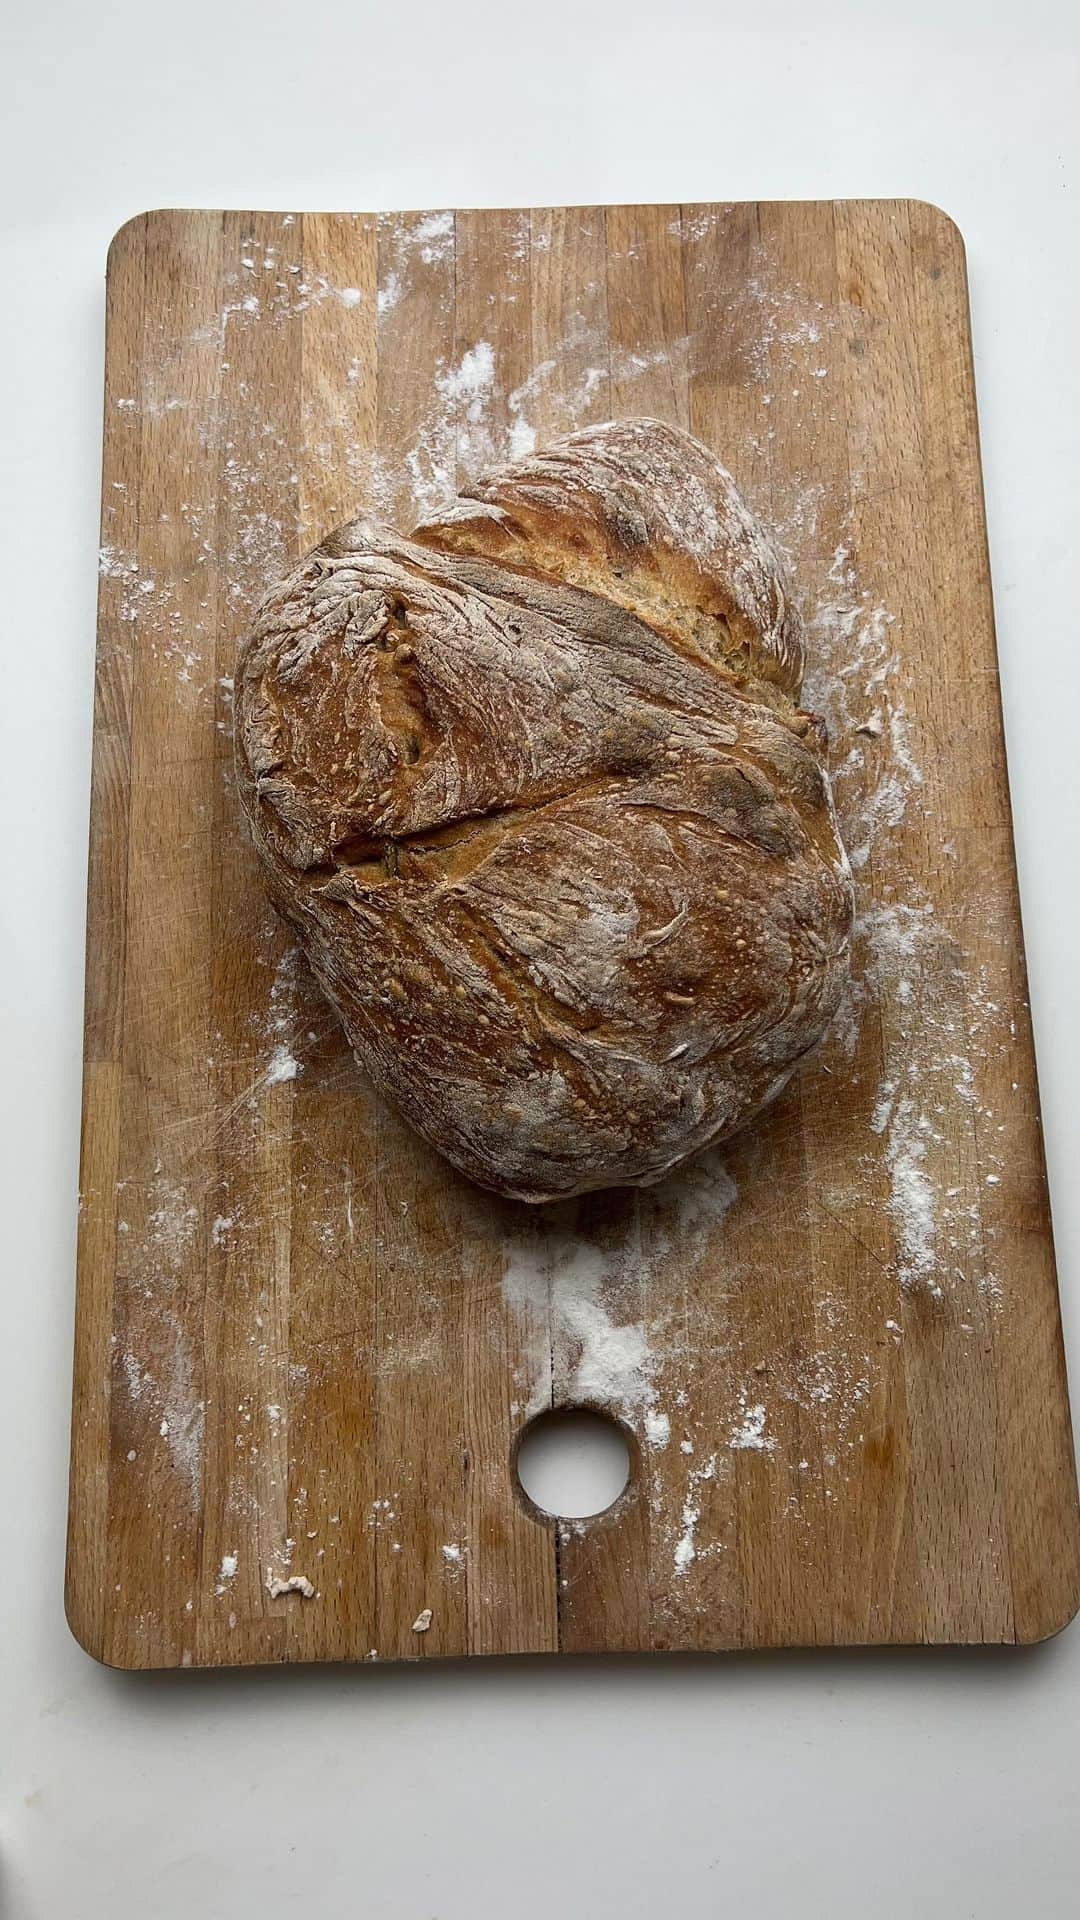 Monica Aksamitのインスタグラム：「I always wanted to bake bread but was too scared to try it but it’s so simple!   3.5 cups flour 1 tsp salt 1/2 tsp yeast 1 3/4 cups warm water 104C (maybe a little more, you don’t want it too dry or too wet) Bake at 425 degrees for 30 minutes, take out pan with water and bake for 5 more minutes for a crispy crust.   Let me know if you give it a try!  #baking #bread #bakingbread #sourdoughbread」